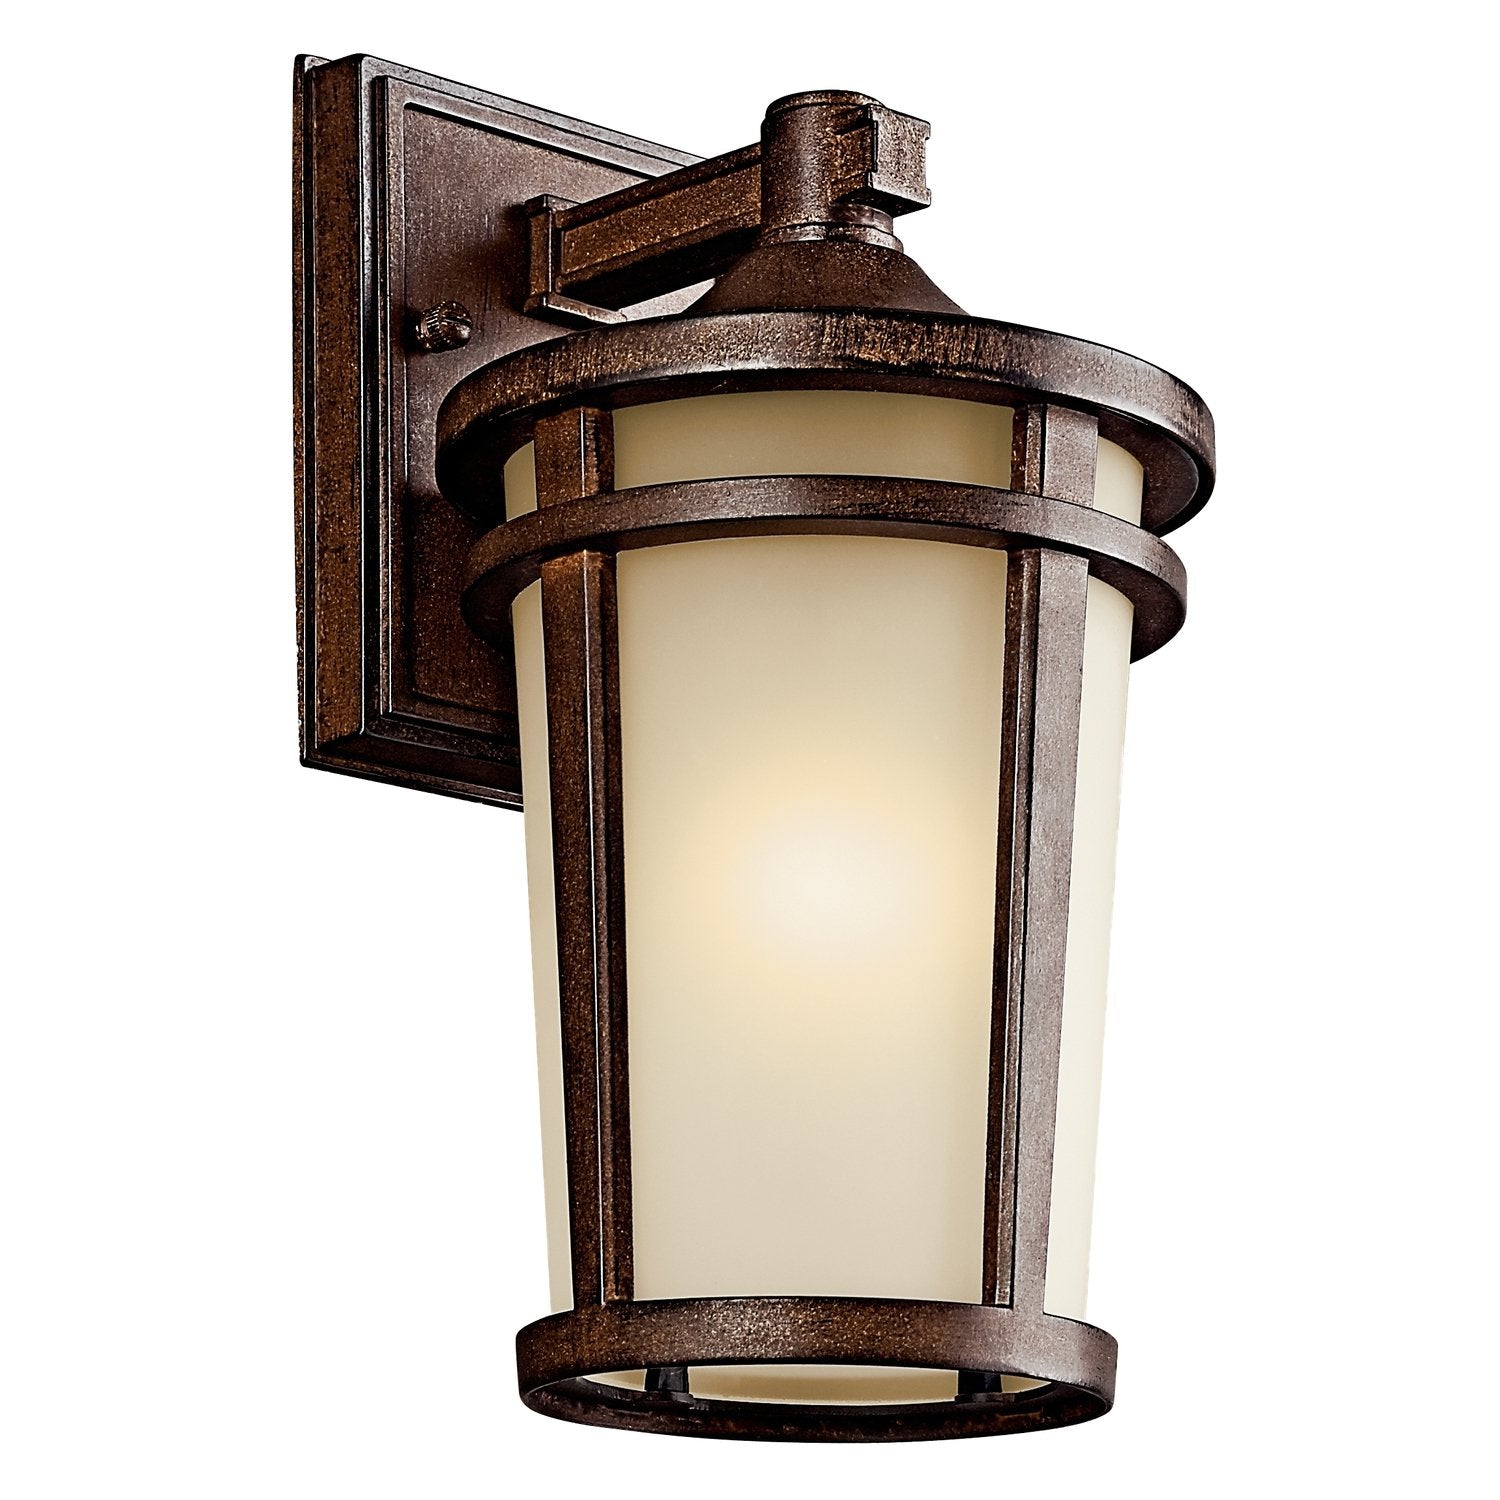 Atwood Outdoor Wall Light Brown Stone